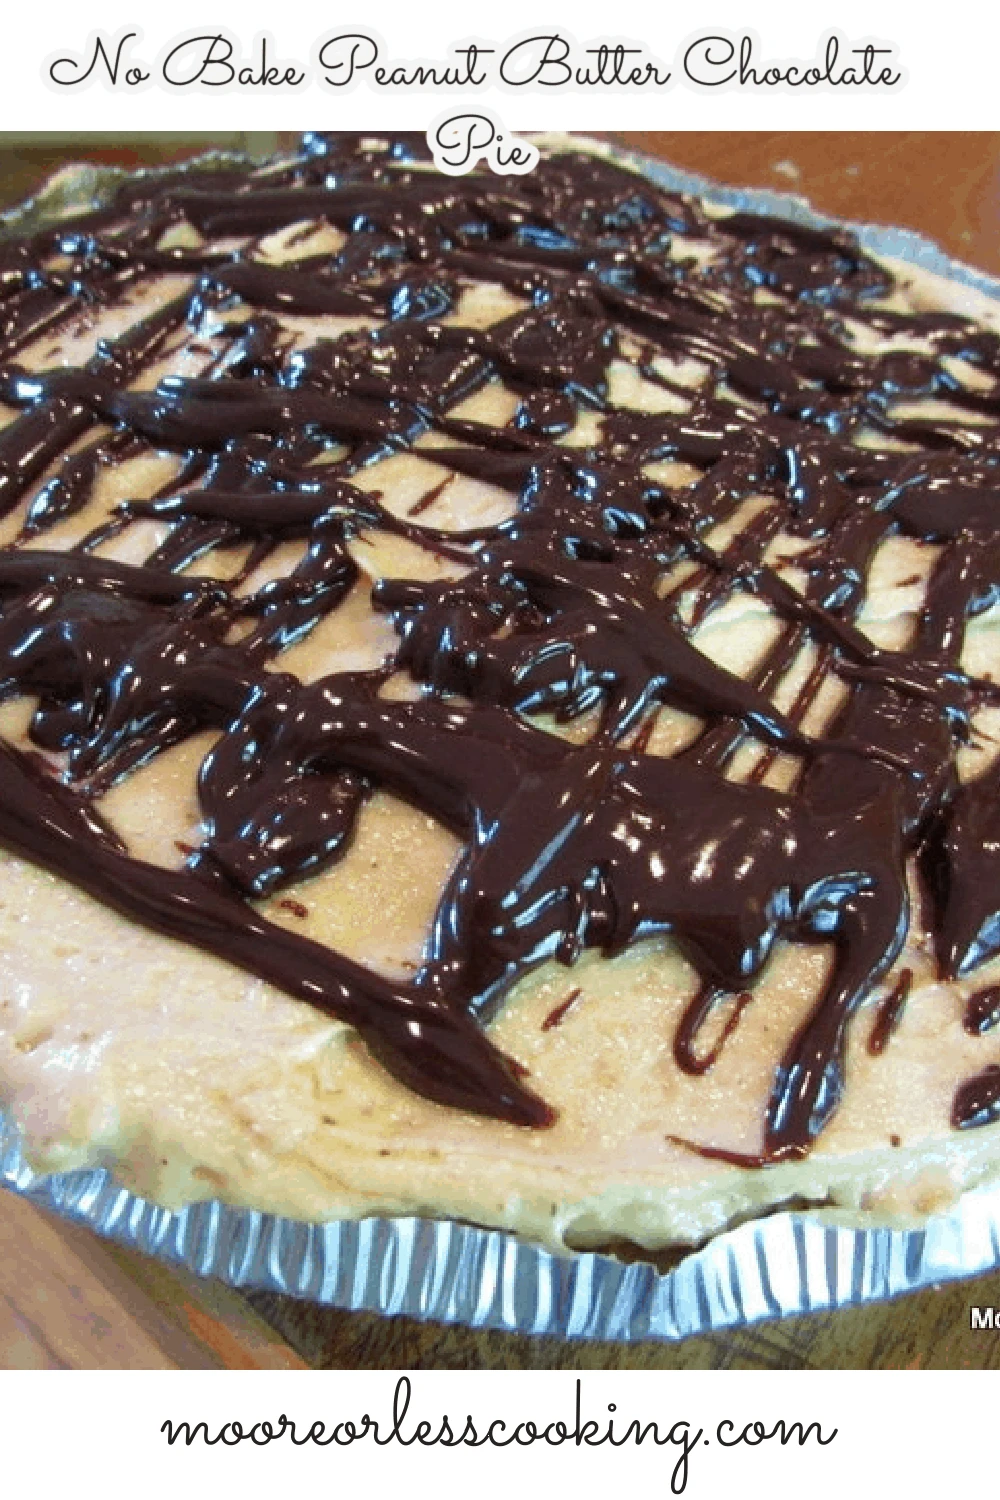 This No-Bake Peanut Butter Pie recipe is a favorite summer pie. It tastes like a giant peanut butter cup in pie form! via @Mooreorlesscook